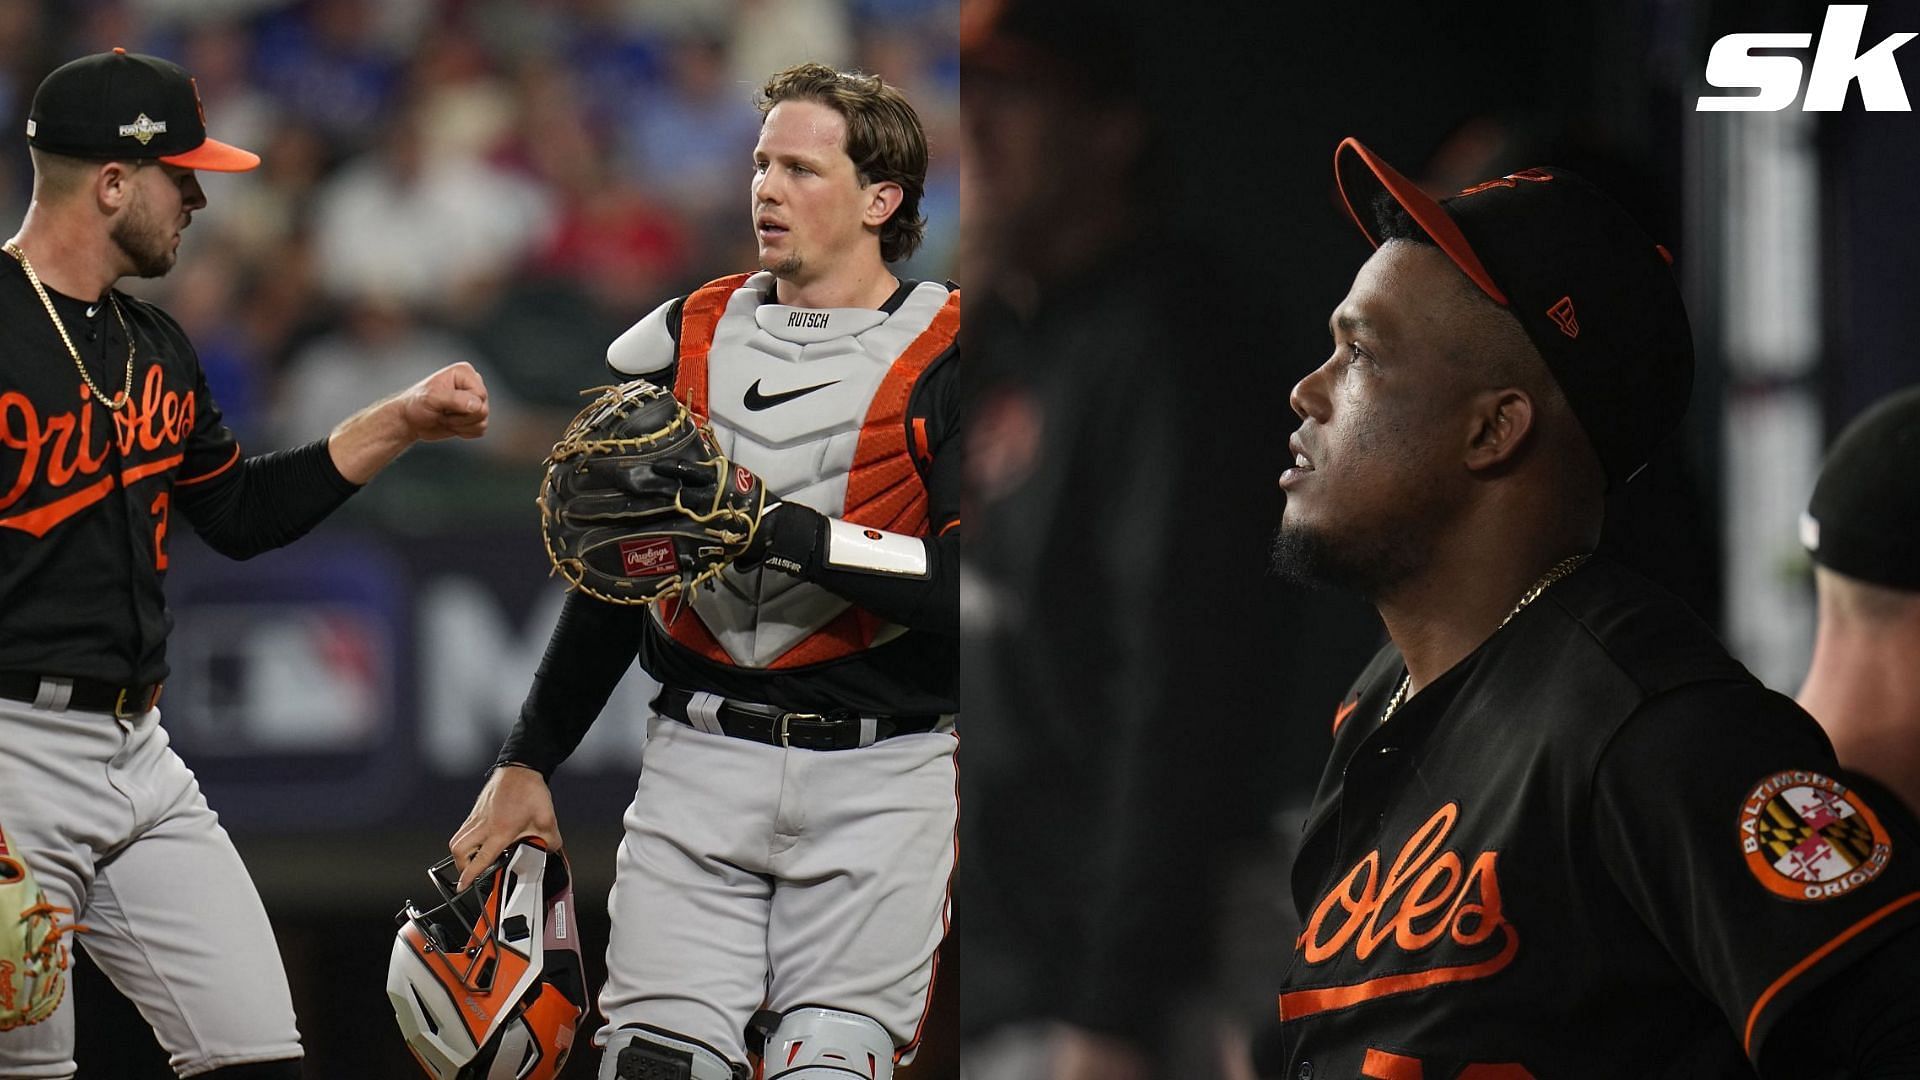 Orioles News: Best Young AL East Players and Other MLB News